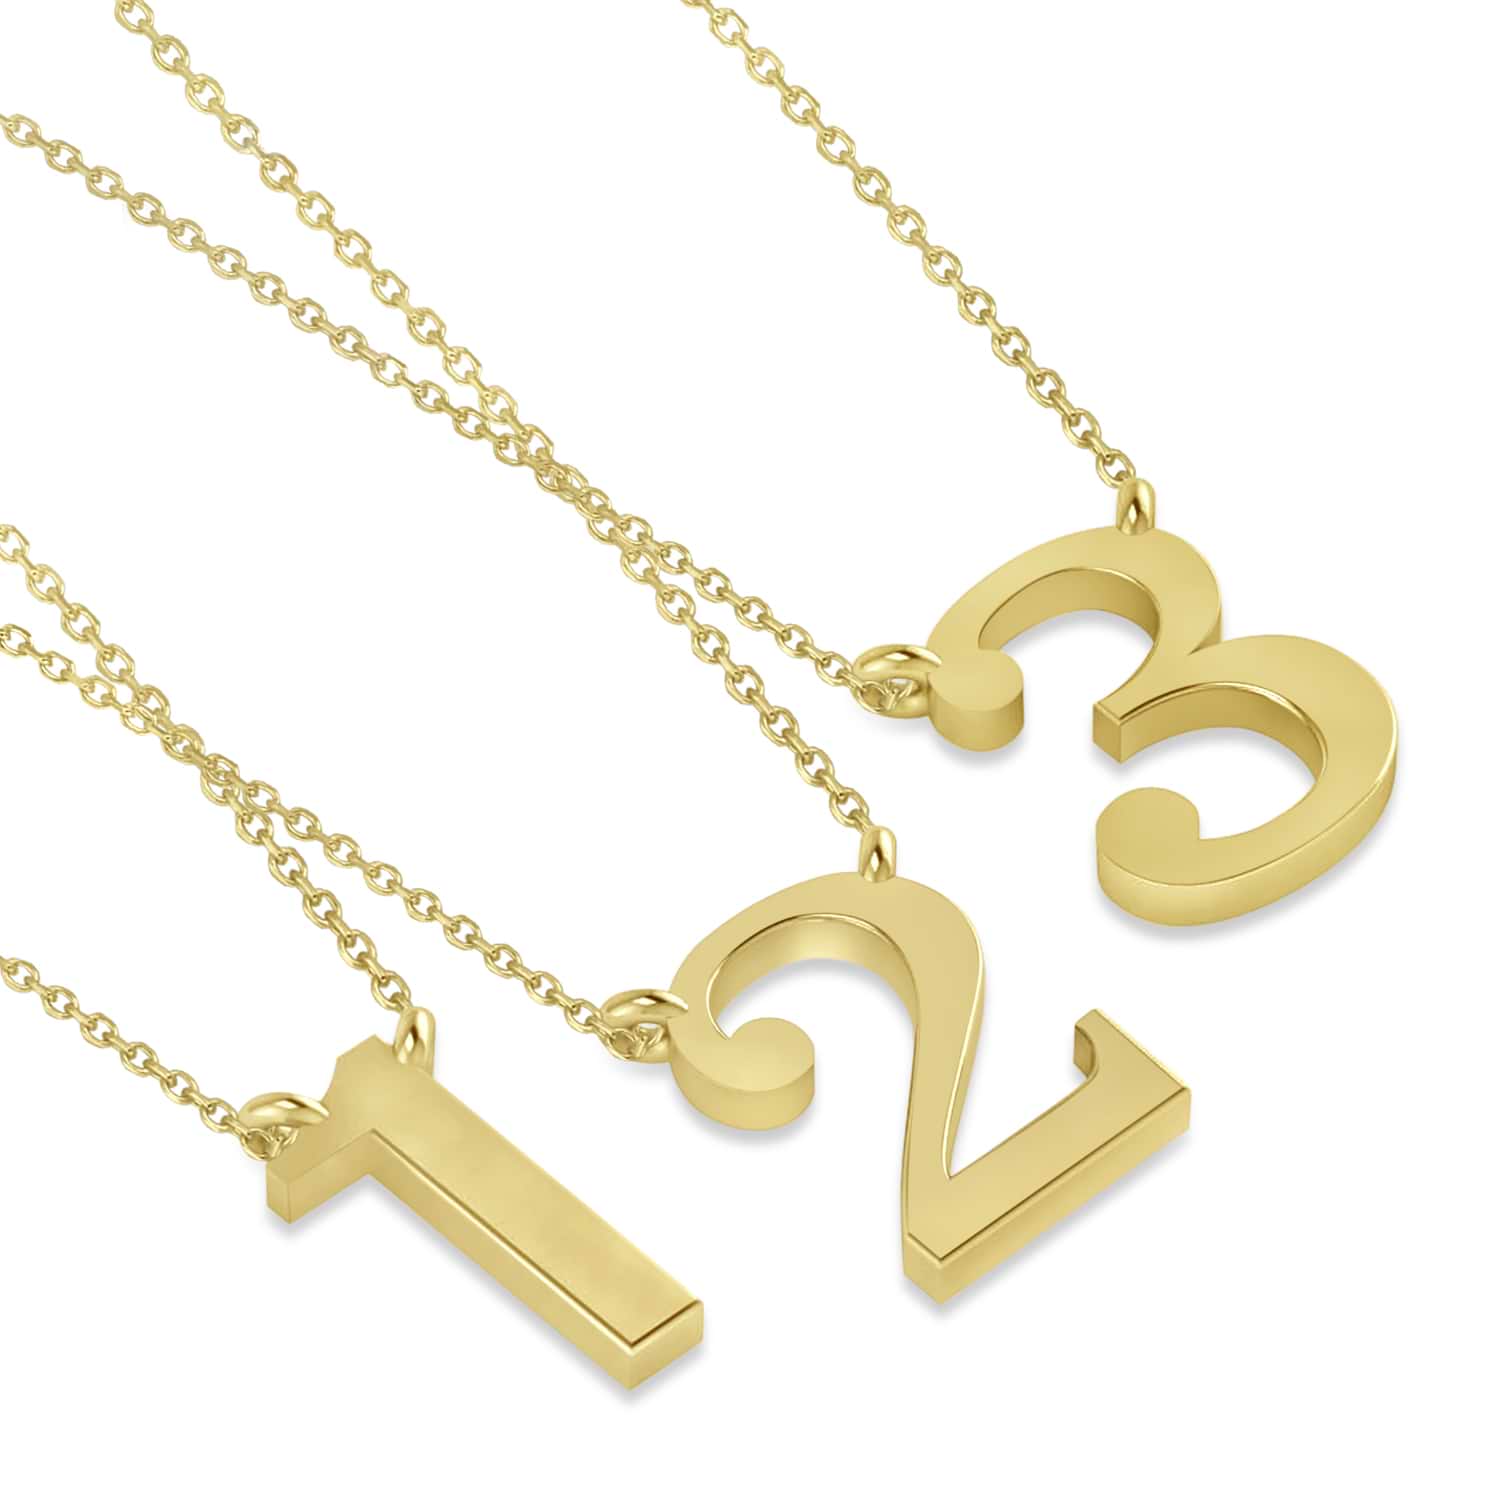 Personalized Plain Text Number Pendant Necklace 14k Yellow Gold